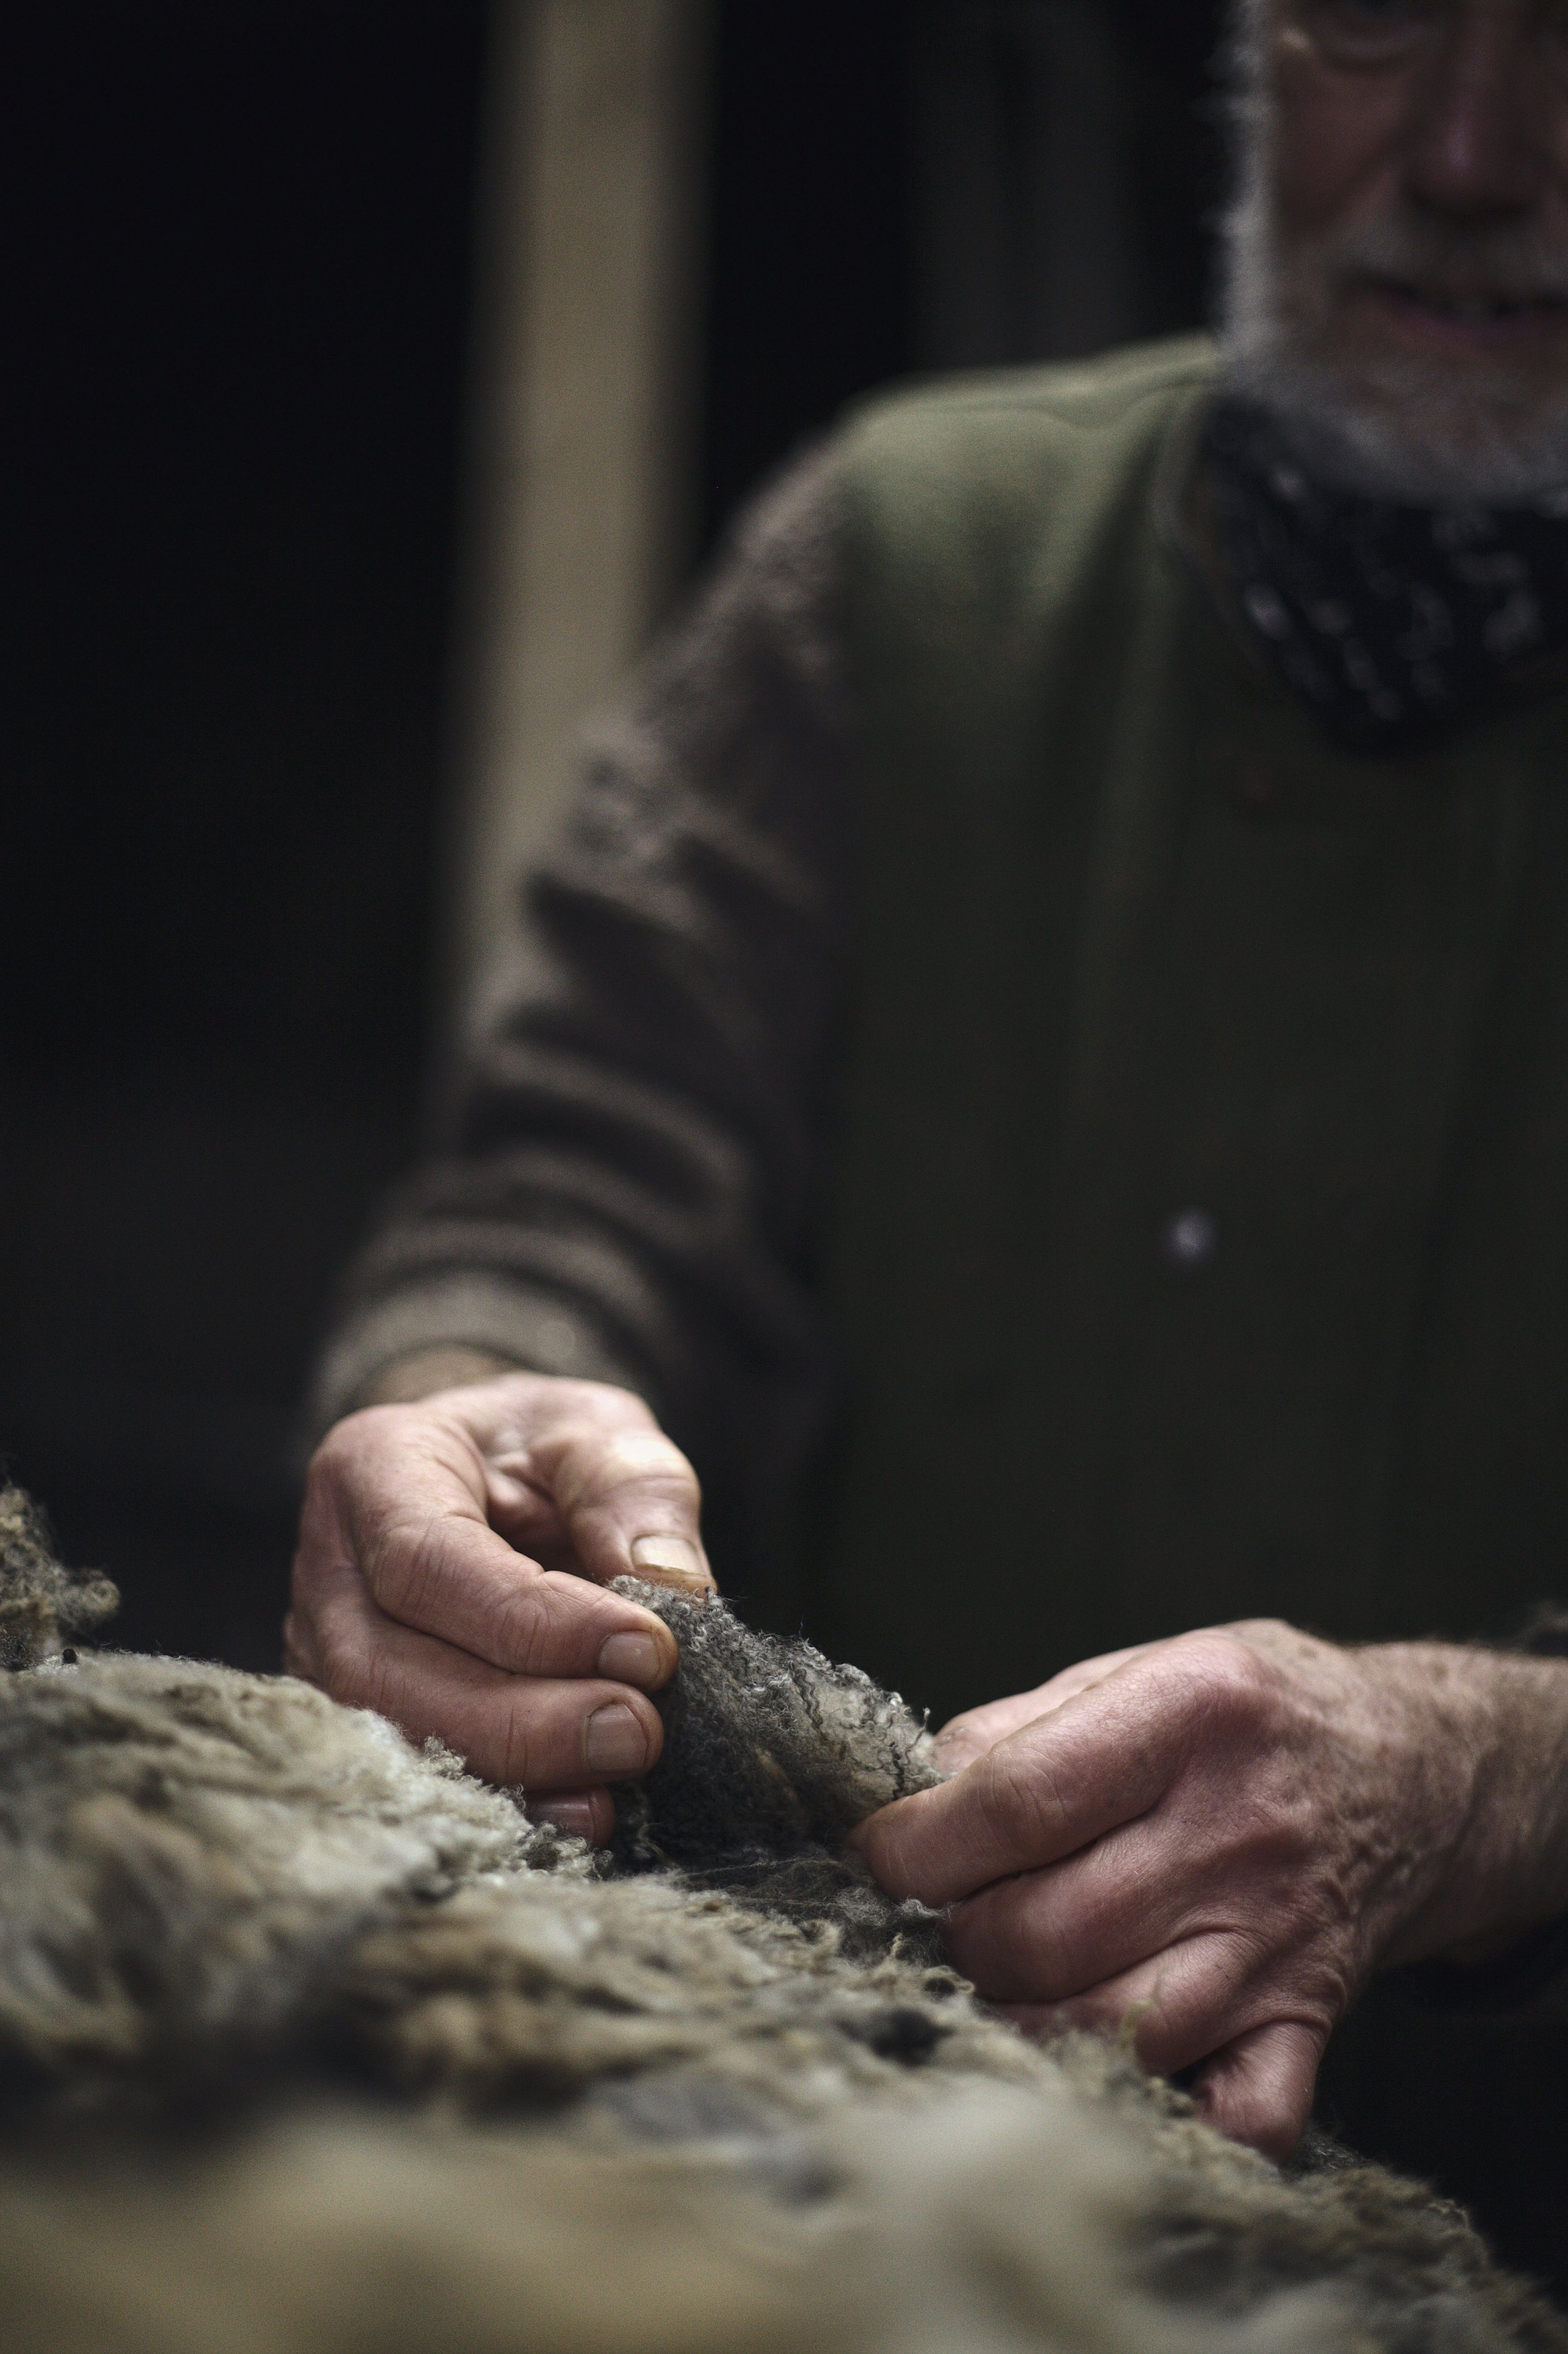  Specializing early on in colored Shetland fleeces which were uncommercial through mainstream sales avenues at the time, Middle Campscott processed their fiber instead through the Natural Fibre Company and became the first UK producer of organic wool